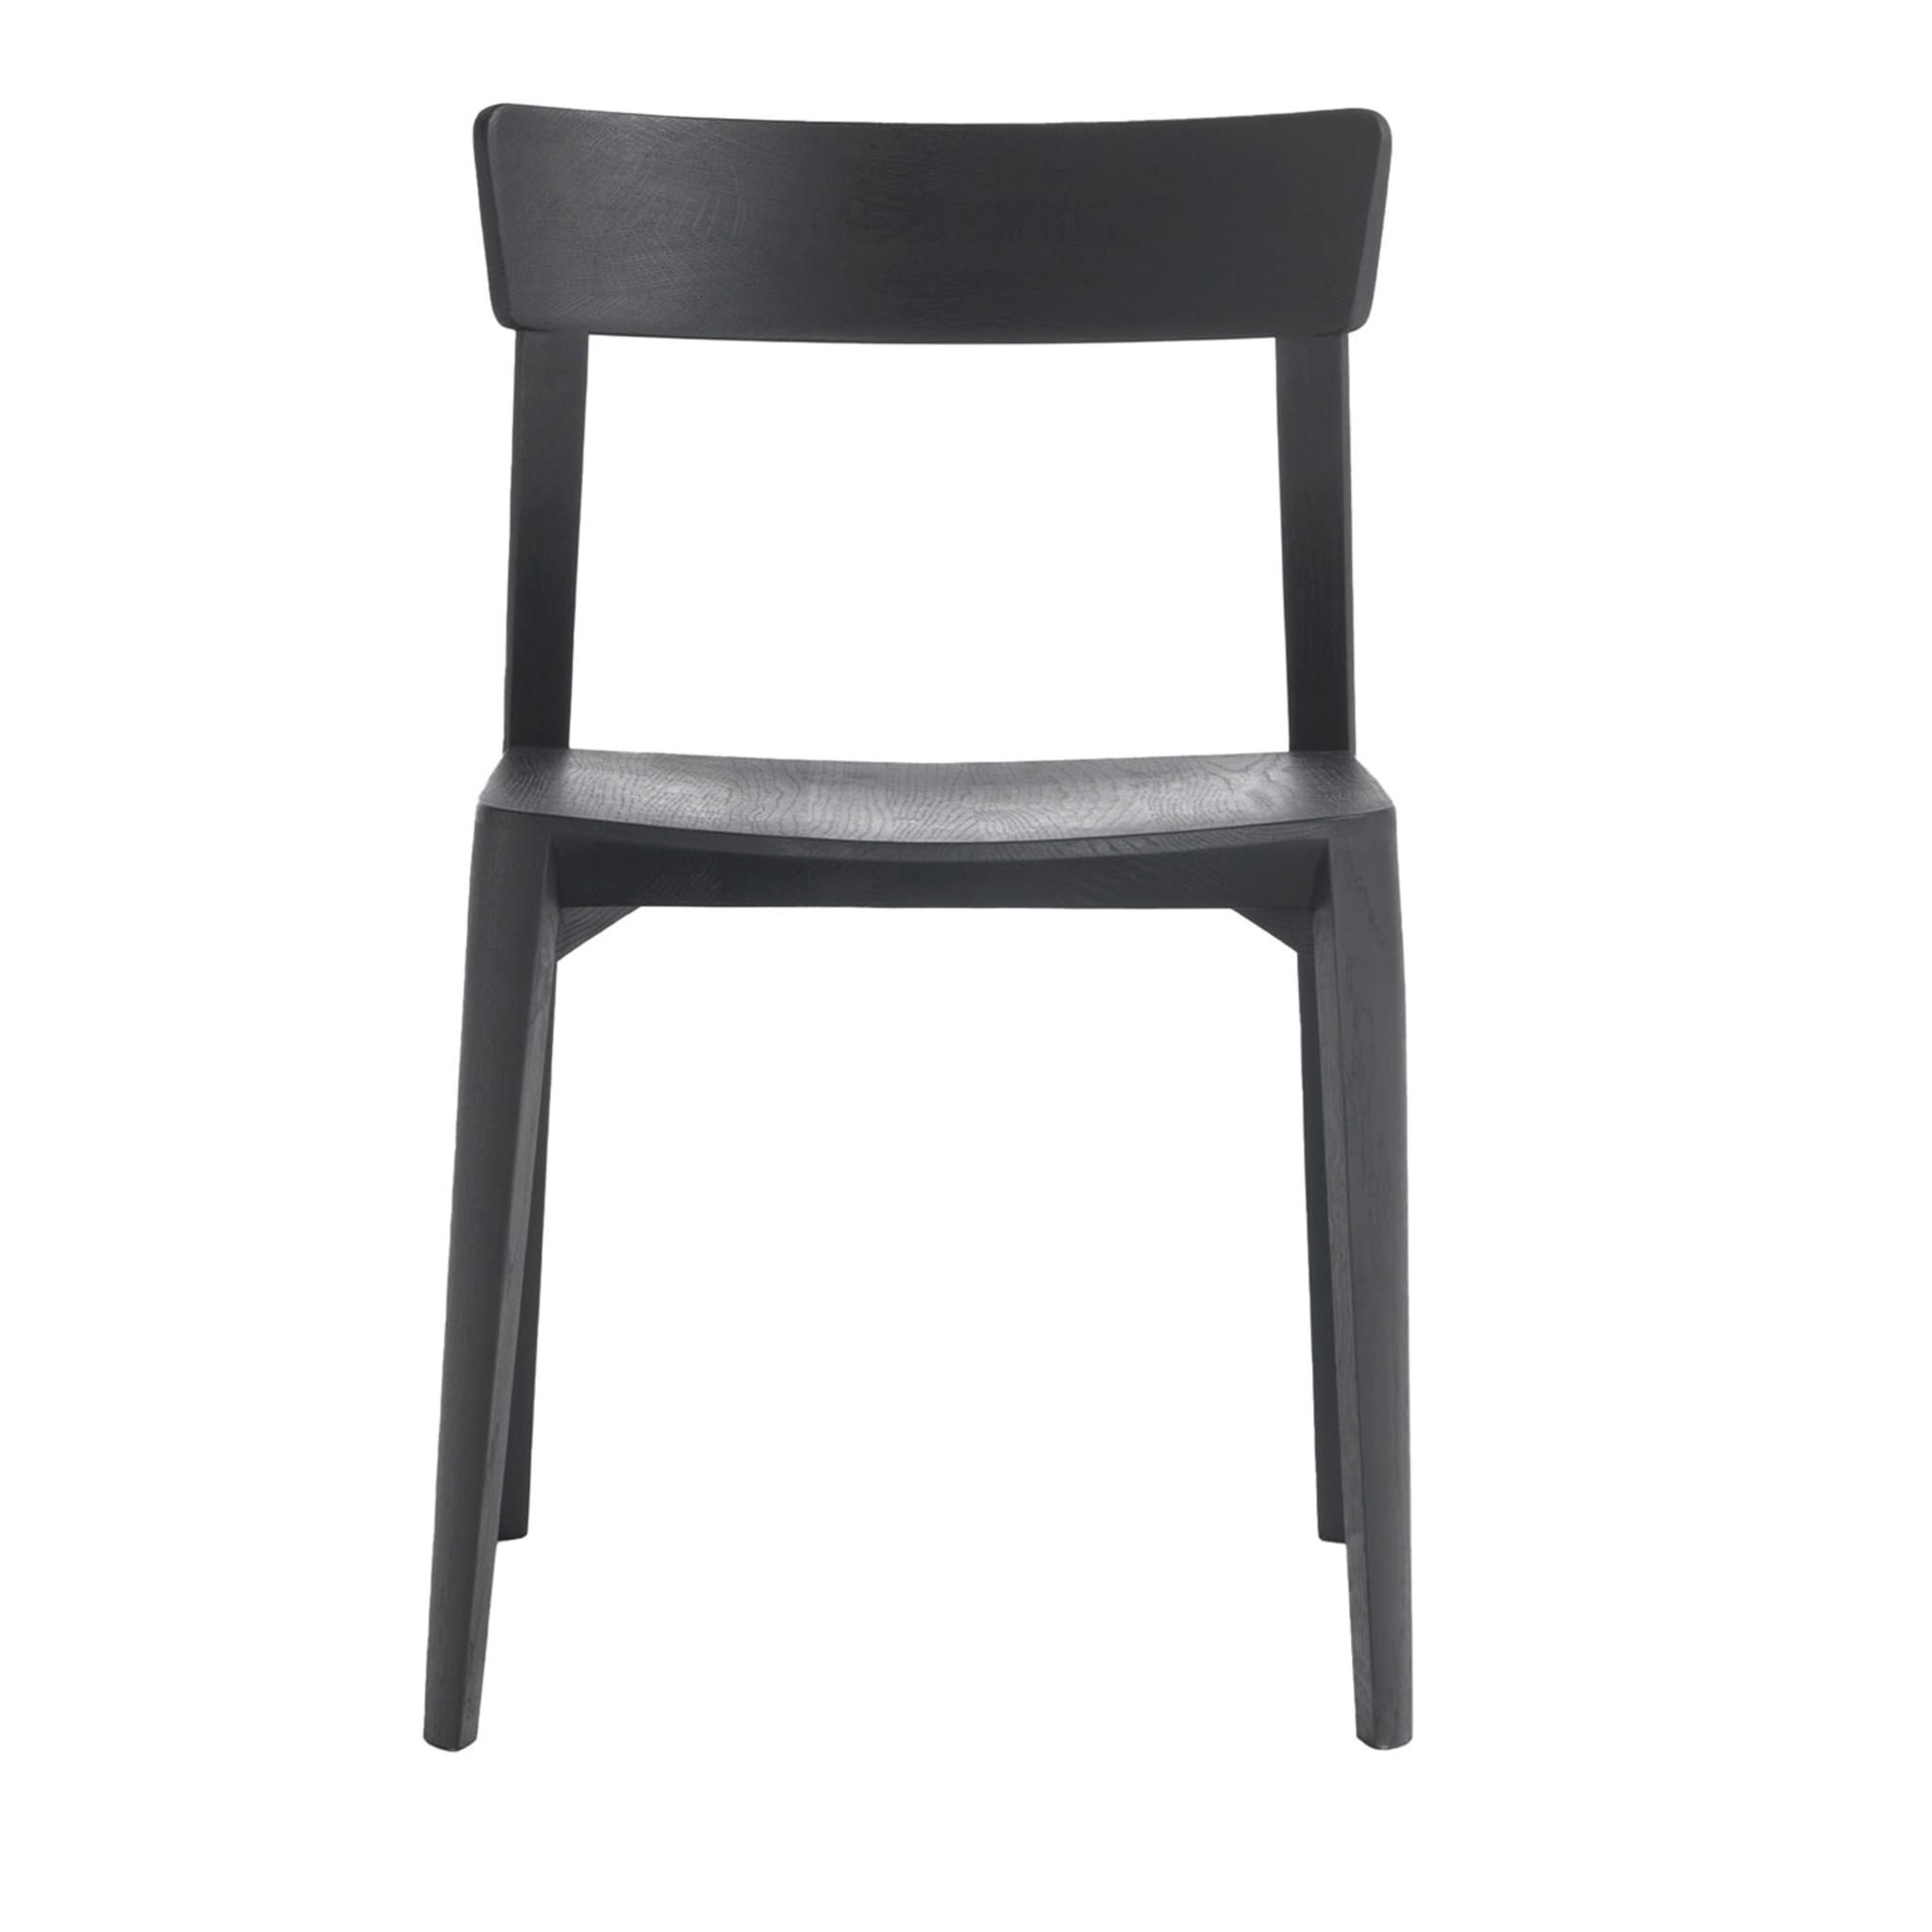 Mia Wood Black Durmast Chair by C.R. & S. Riva 1920 - Main view